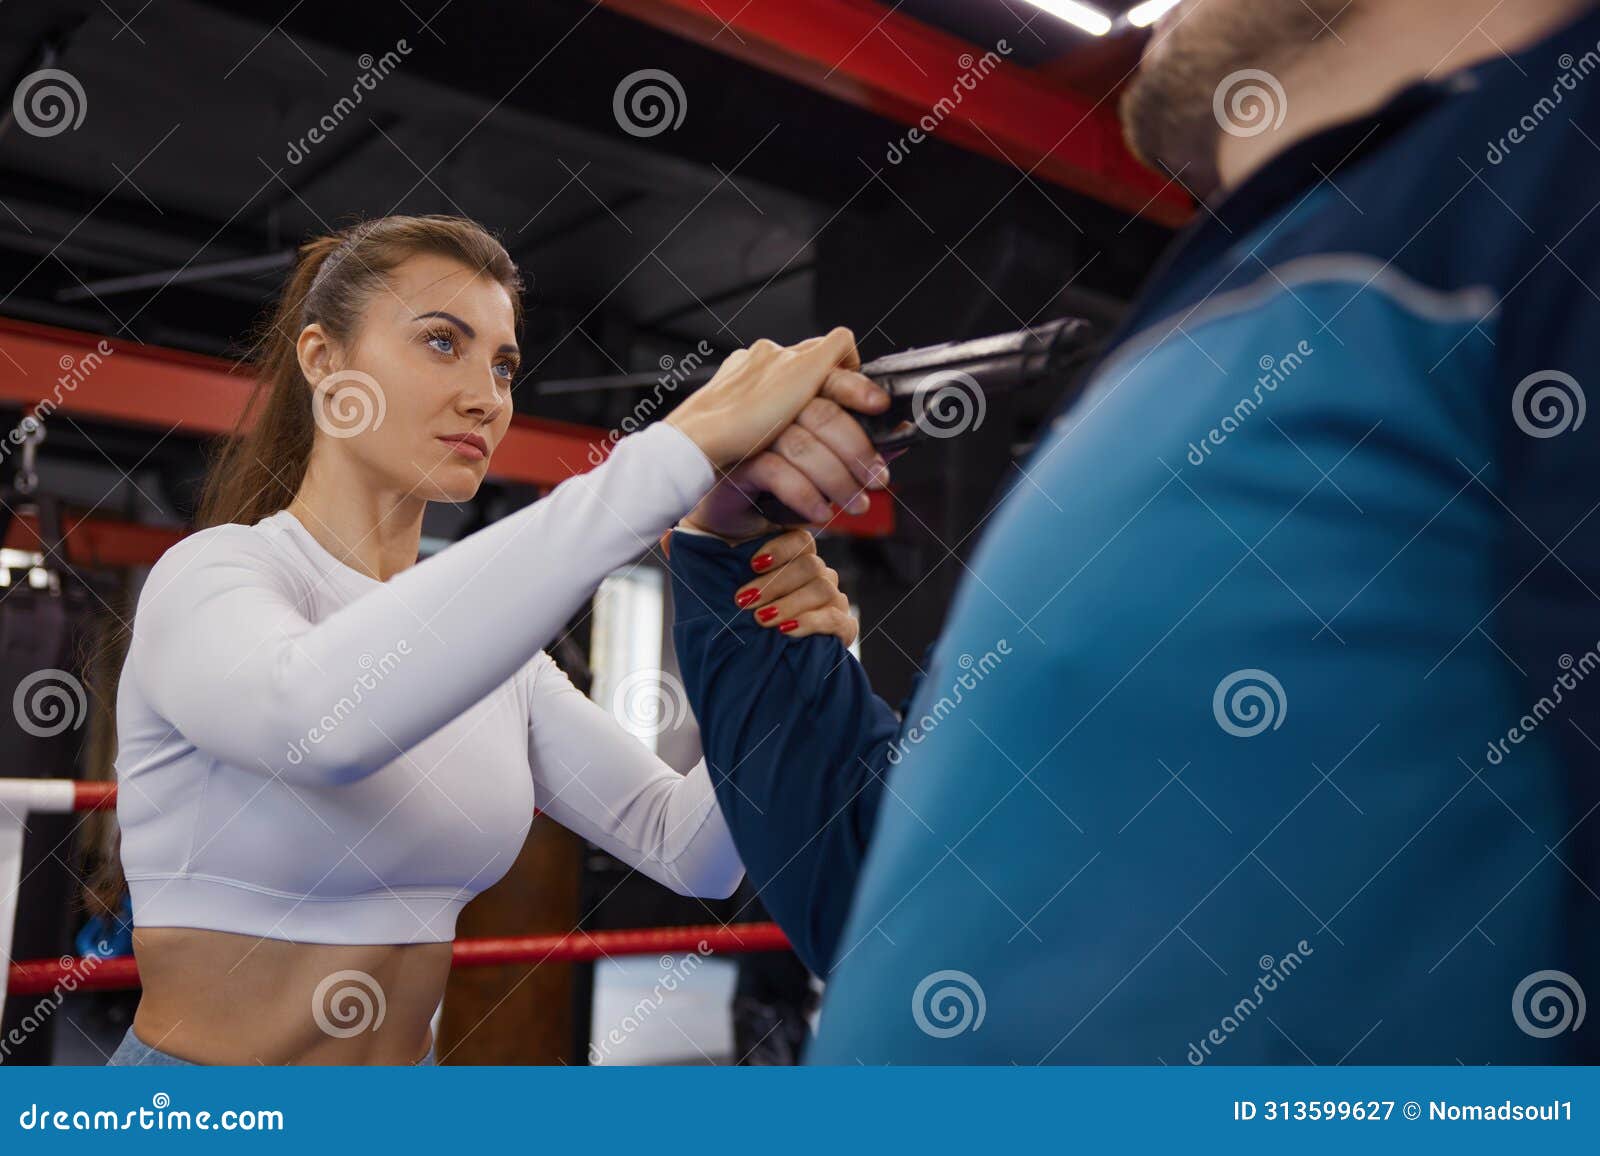 sportive young woman training self-defense from attacker with gun weapon